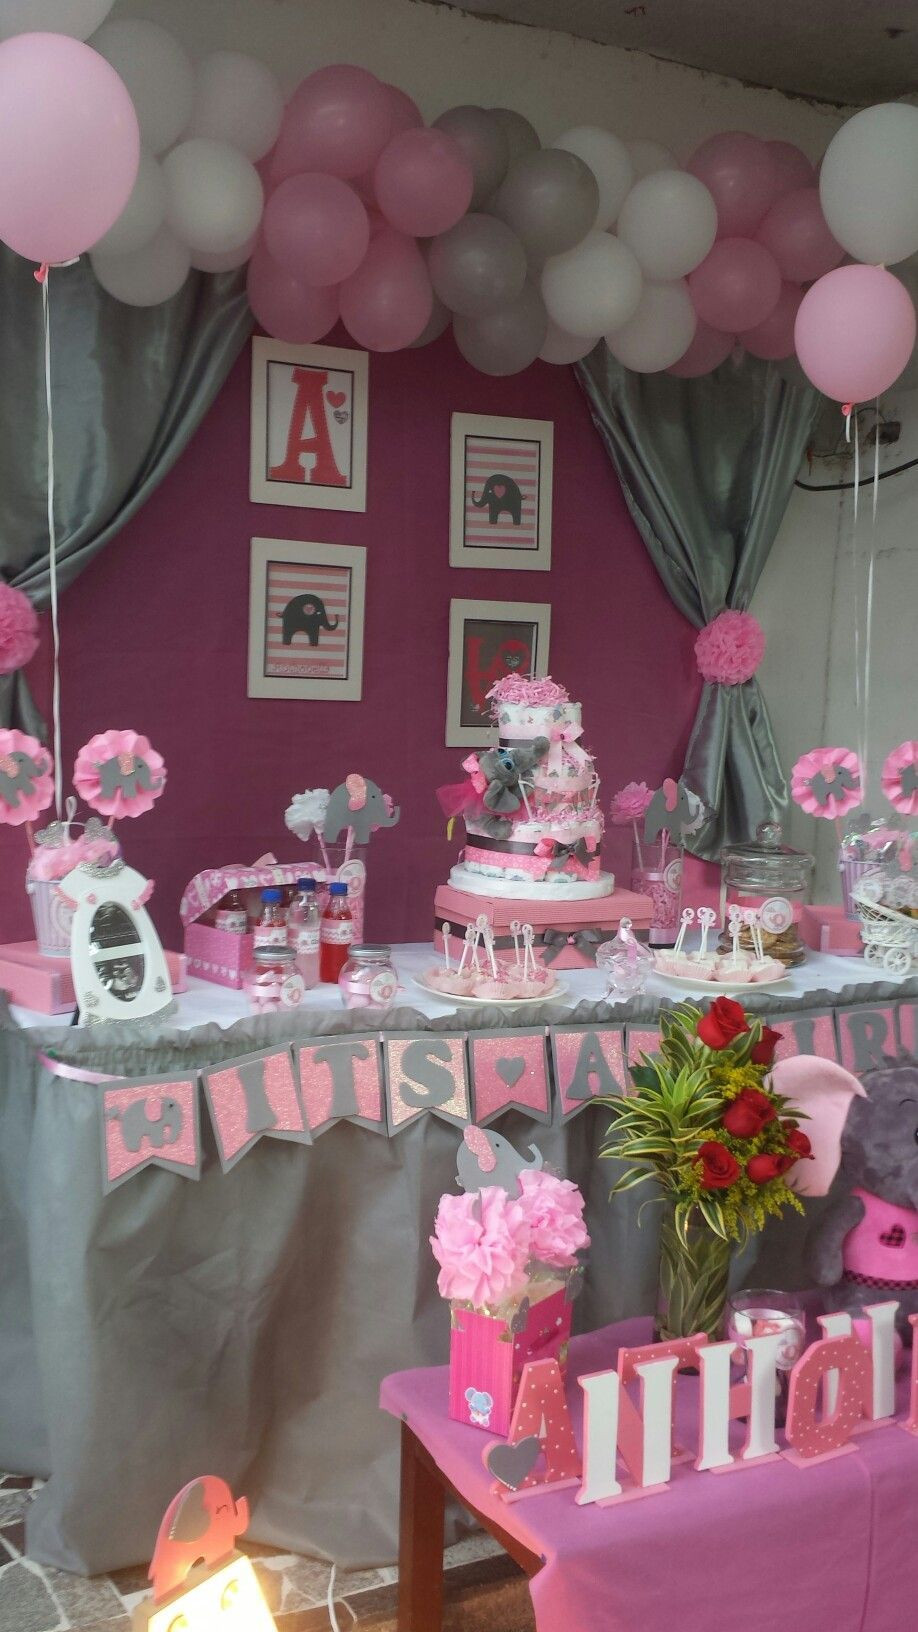 Wall Decor For Baby Shower
 Pink and glitter baby shower themes are perfect for